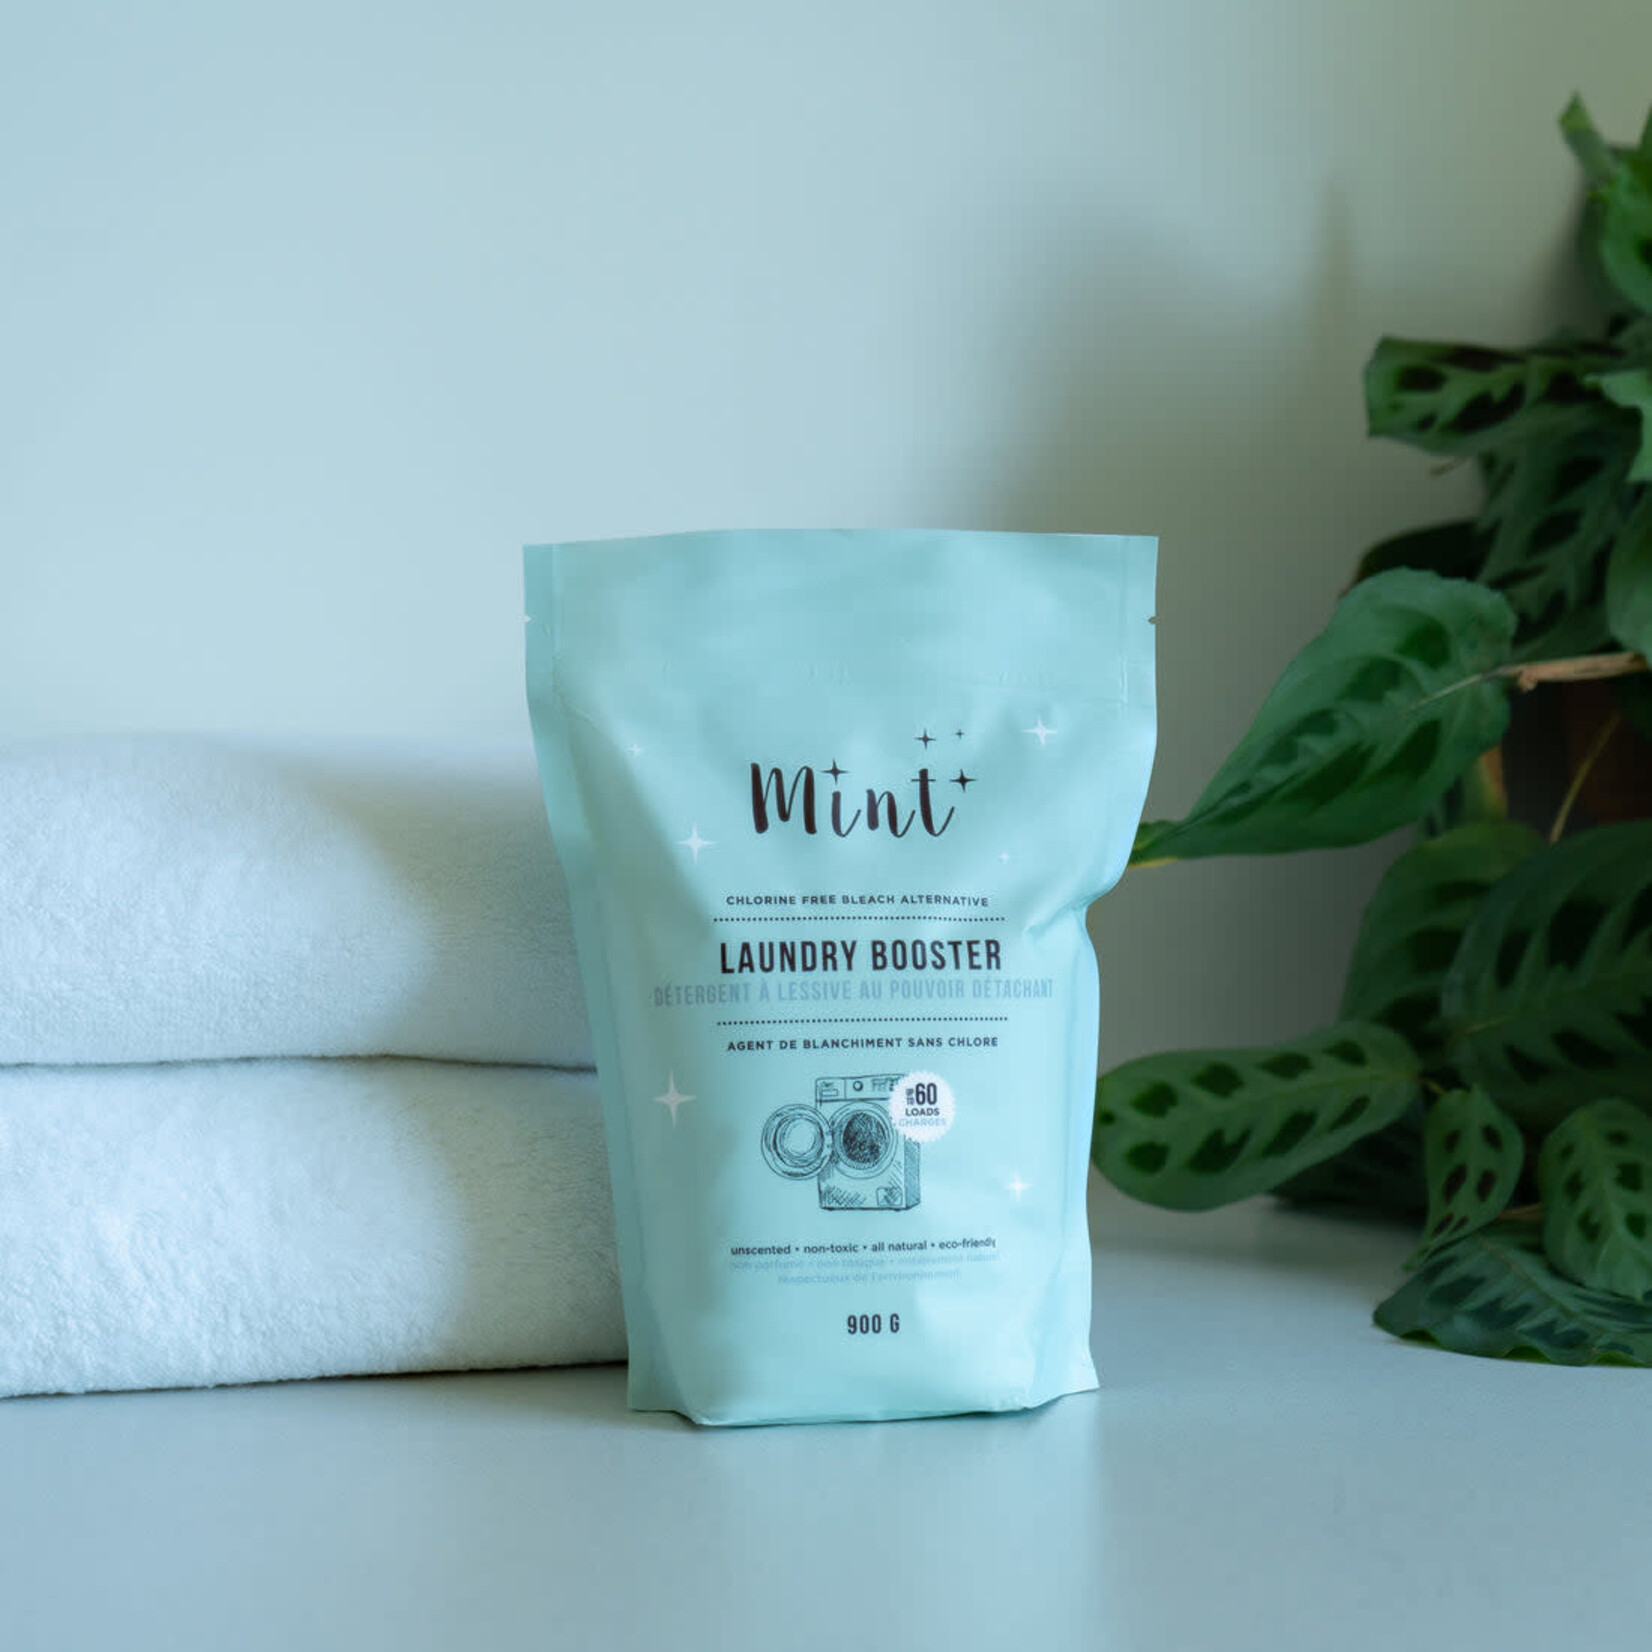 Laundry Booster by Mint